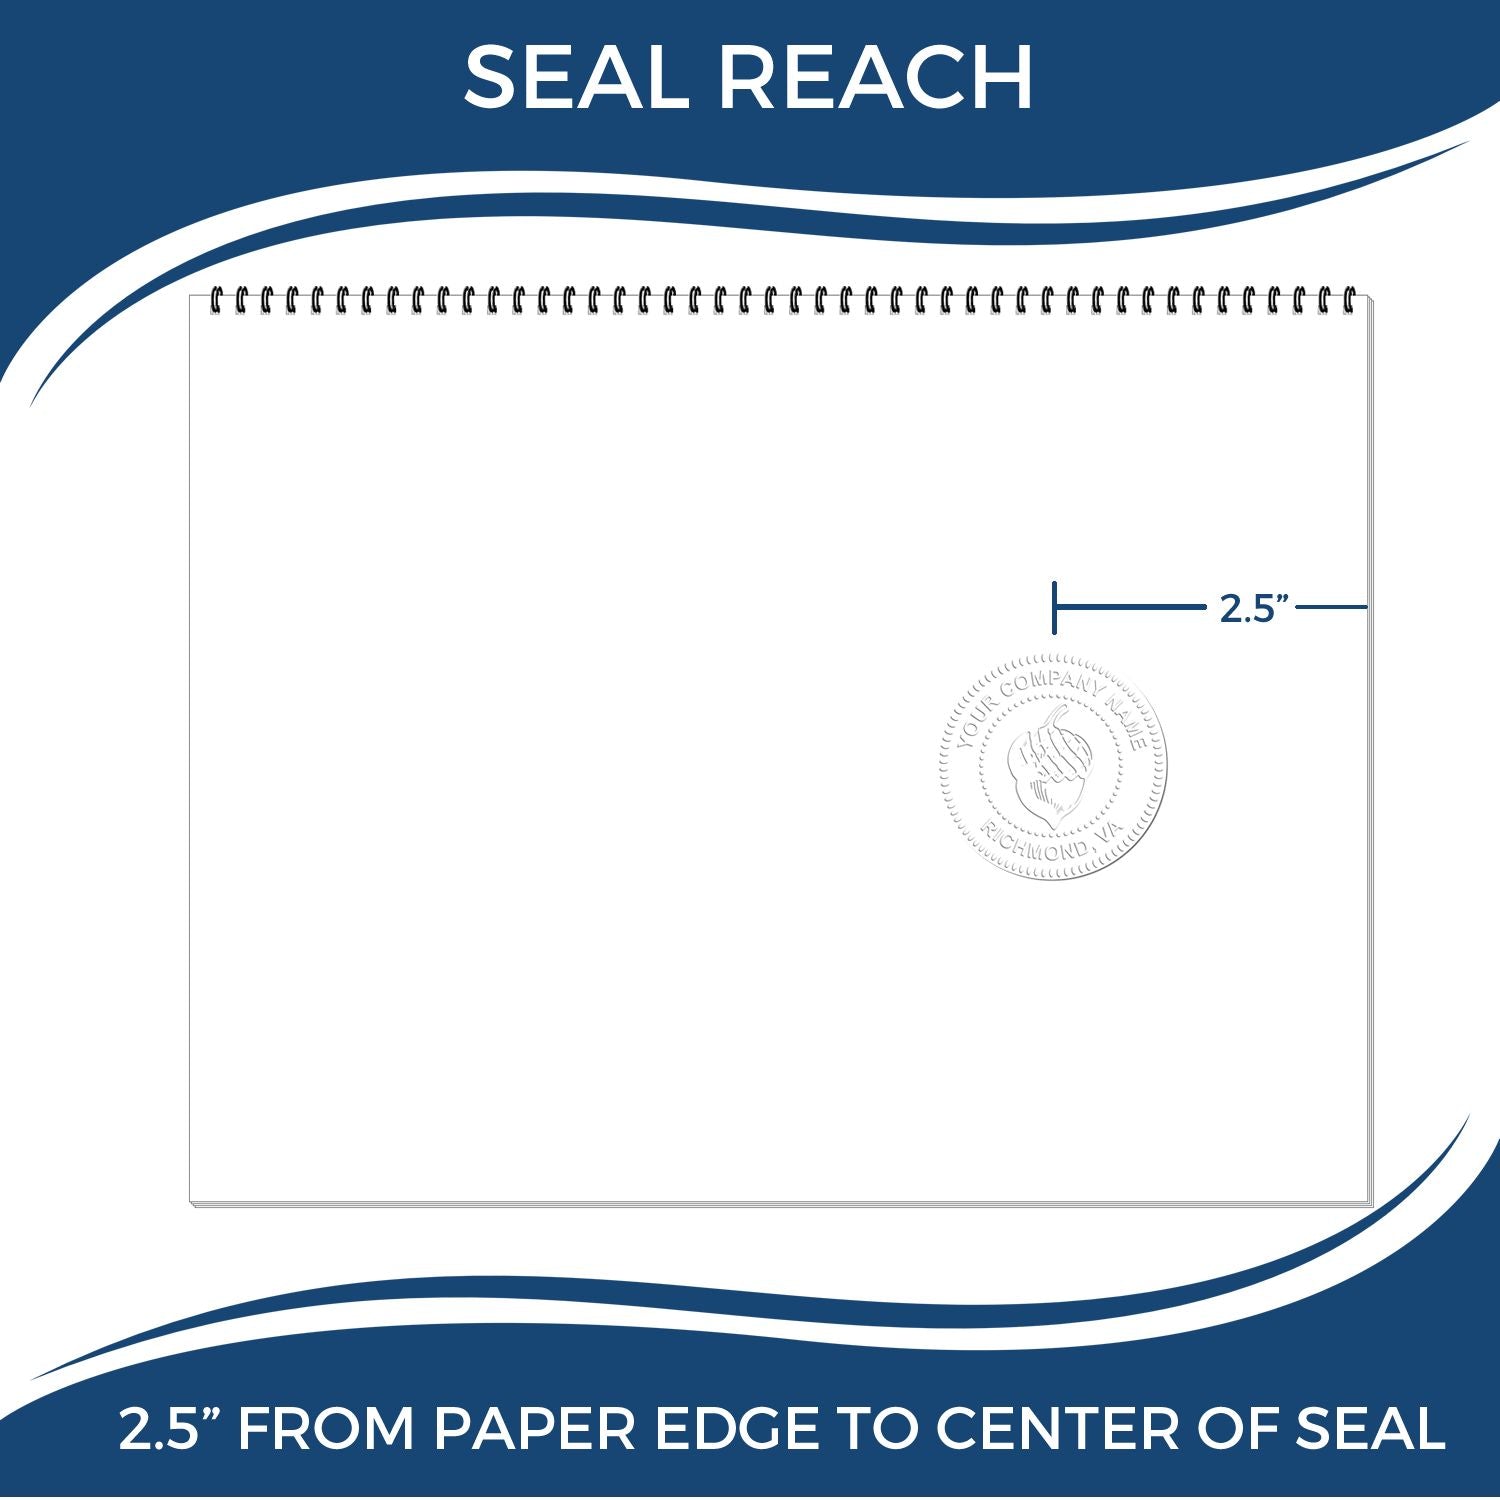 An infographic showing the seal reach which is represented by a ruler and a miniature seal image of the Heavy Duty Cast Iron Utah Geologist Seal Embosser